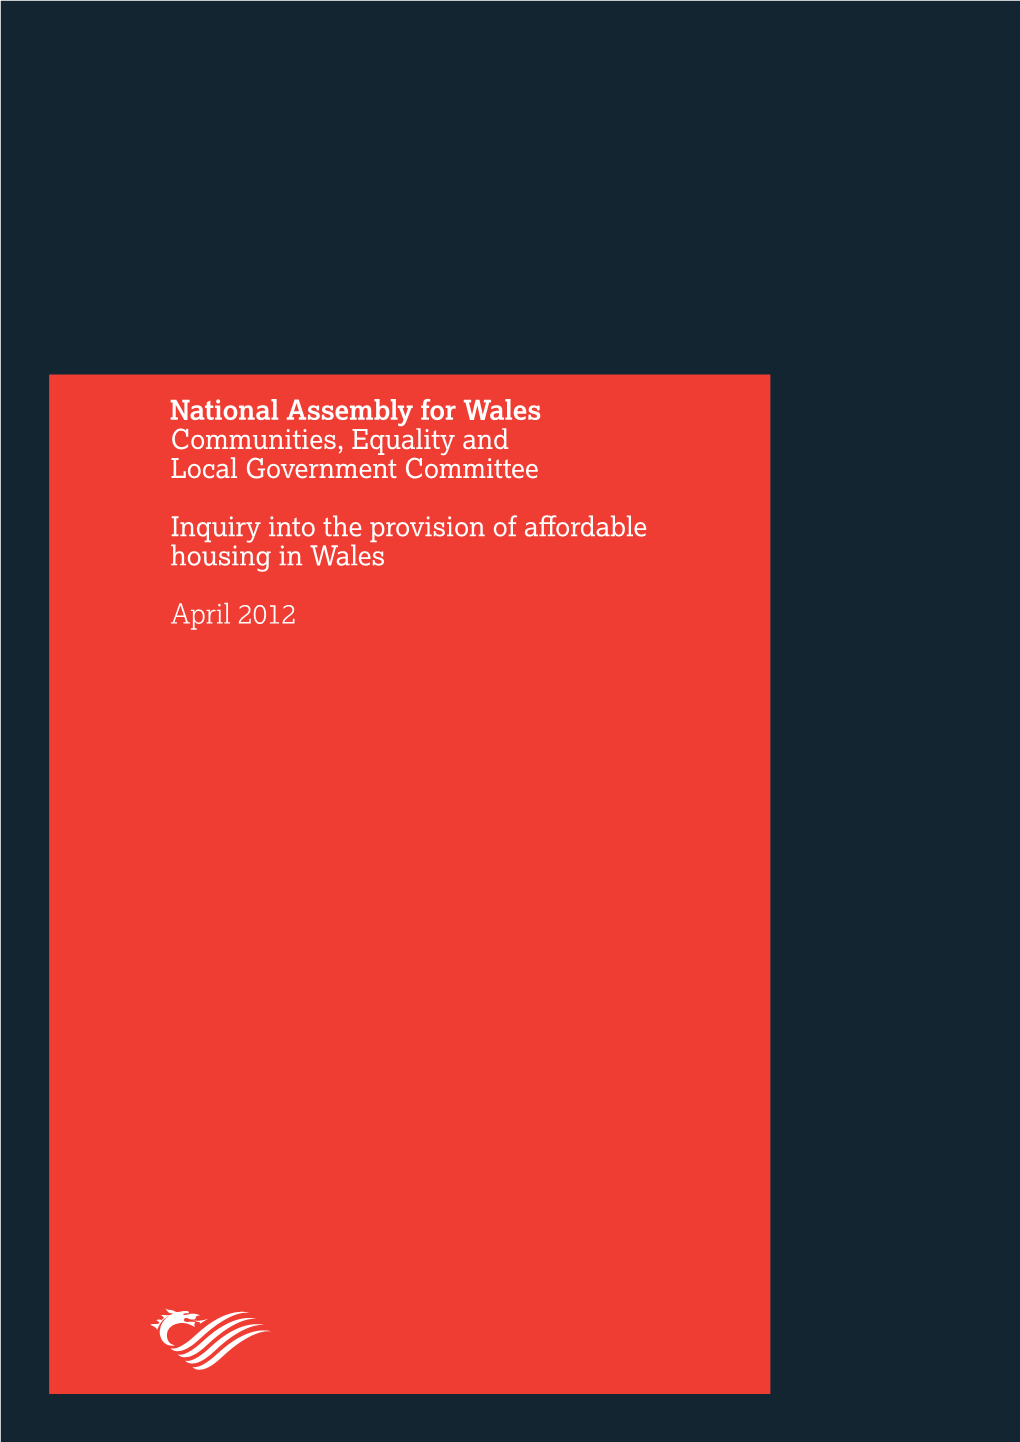 The Provision of Affordable Housing in Wales– April 2012